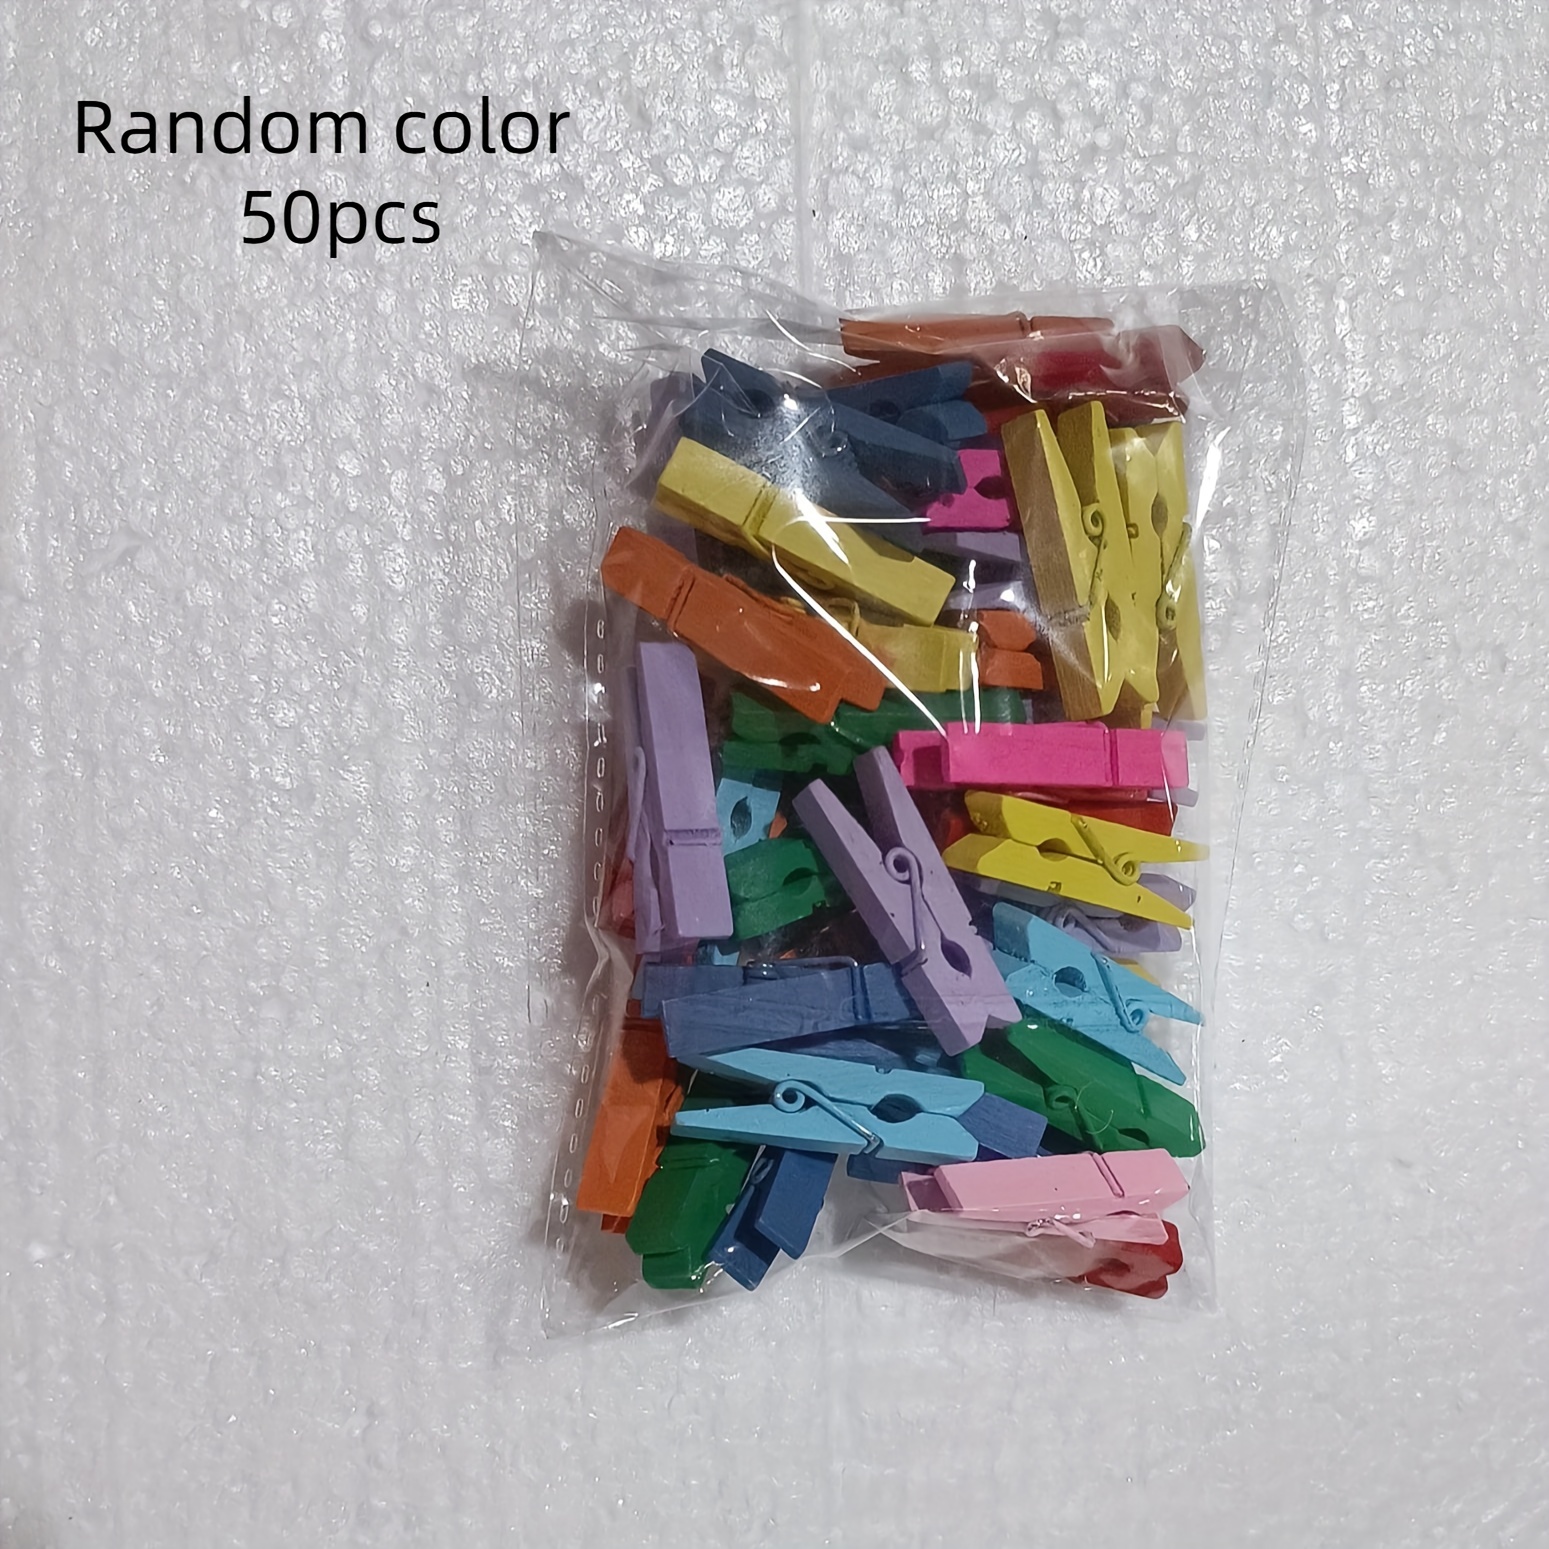 DurReus Colorful Small Clothes Pins Photos String Display with Clips Art Hanging Kit for Artwork 50pcs